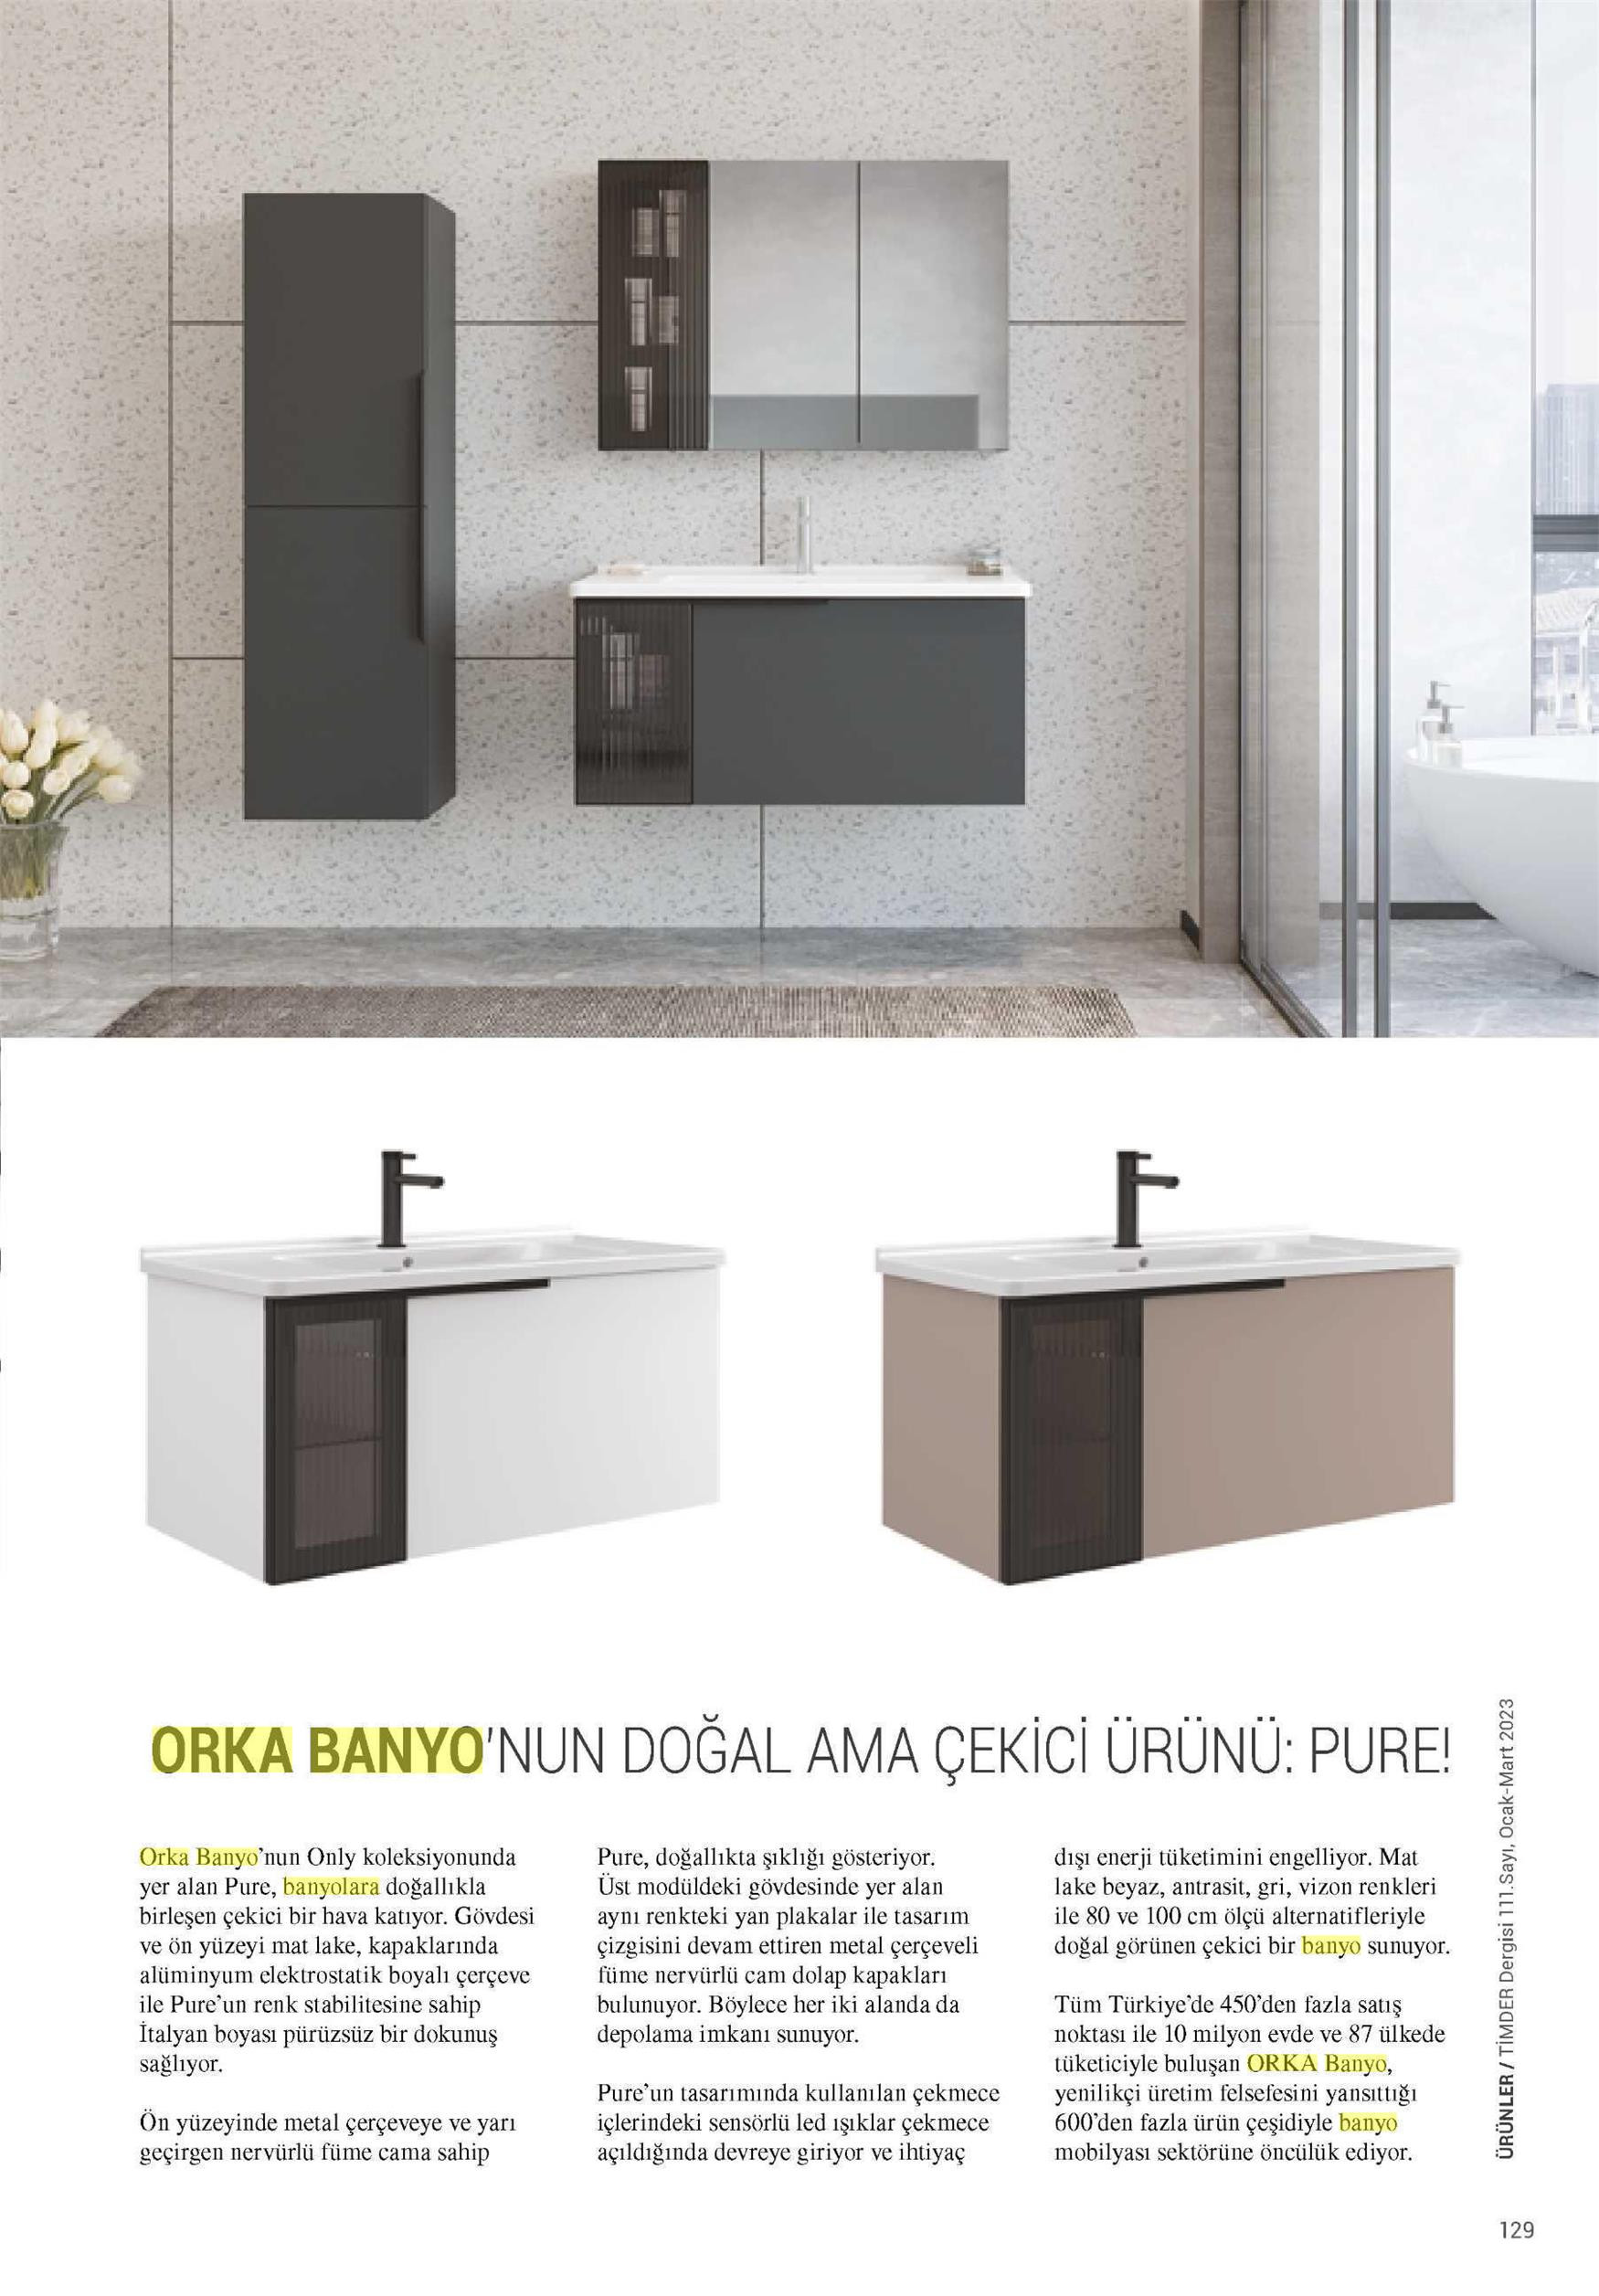 ORKA Bathroom's Natural yet Appealing Product: PURE!